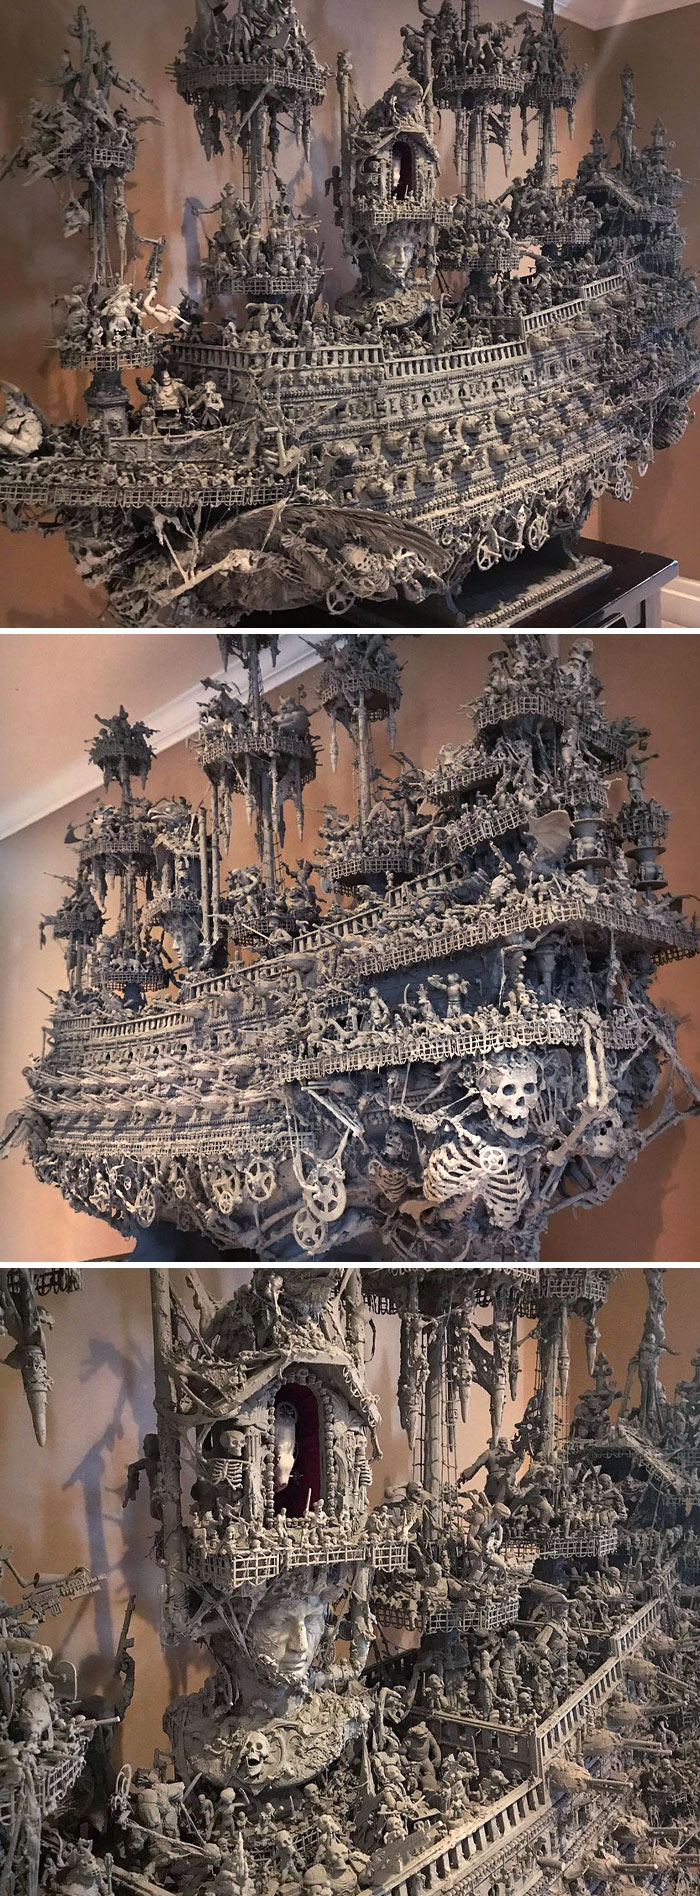 "Ark Of The Apocalypse". It Took Me About 14 Months To Complete This. My Work Stands 8 Feet On A Custom-Made Table, 7.5 Feet In Length, And About 2.5 Feet Wide